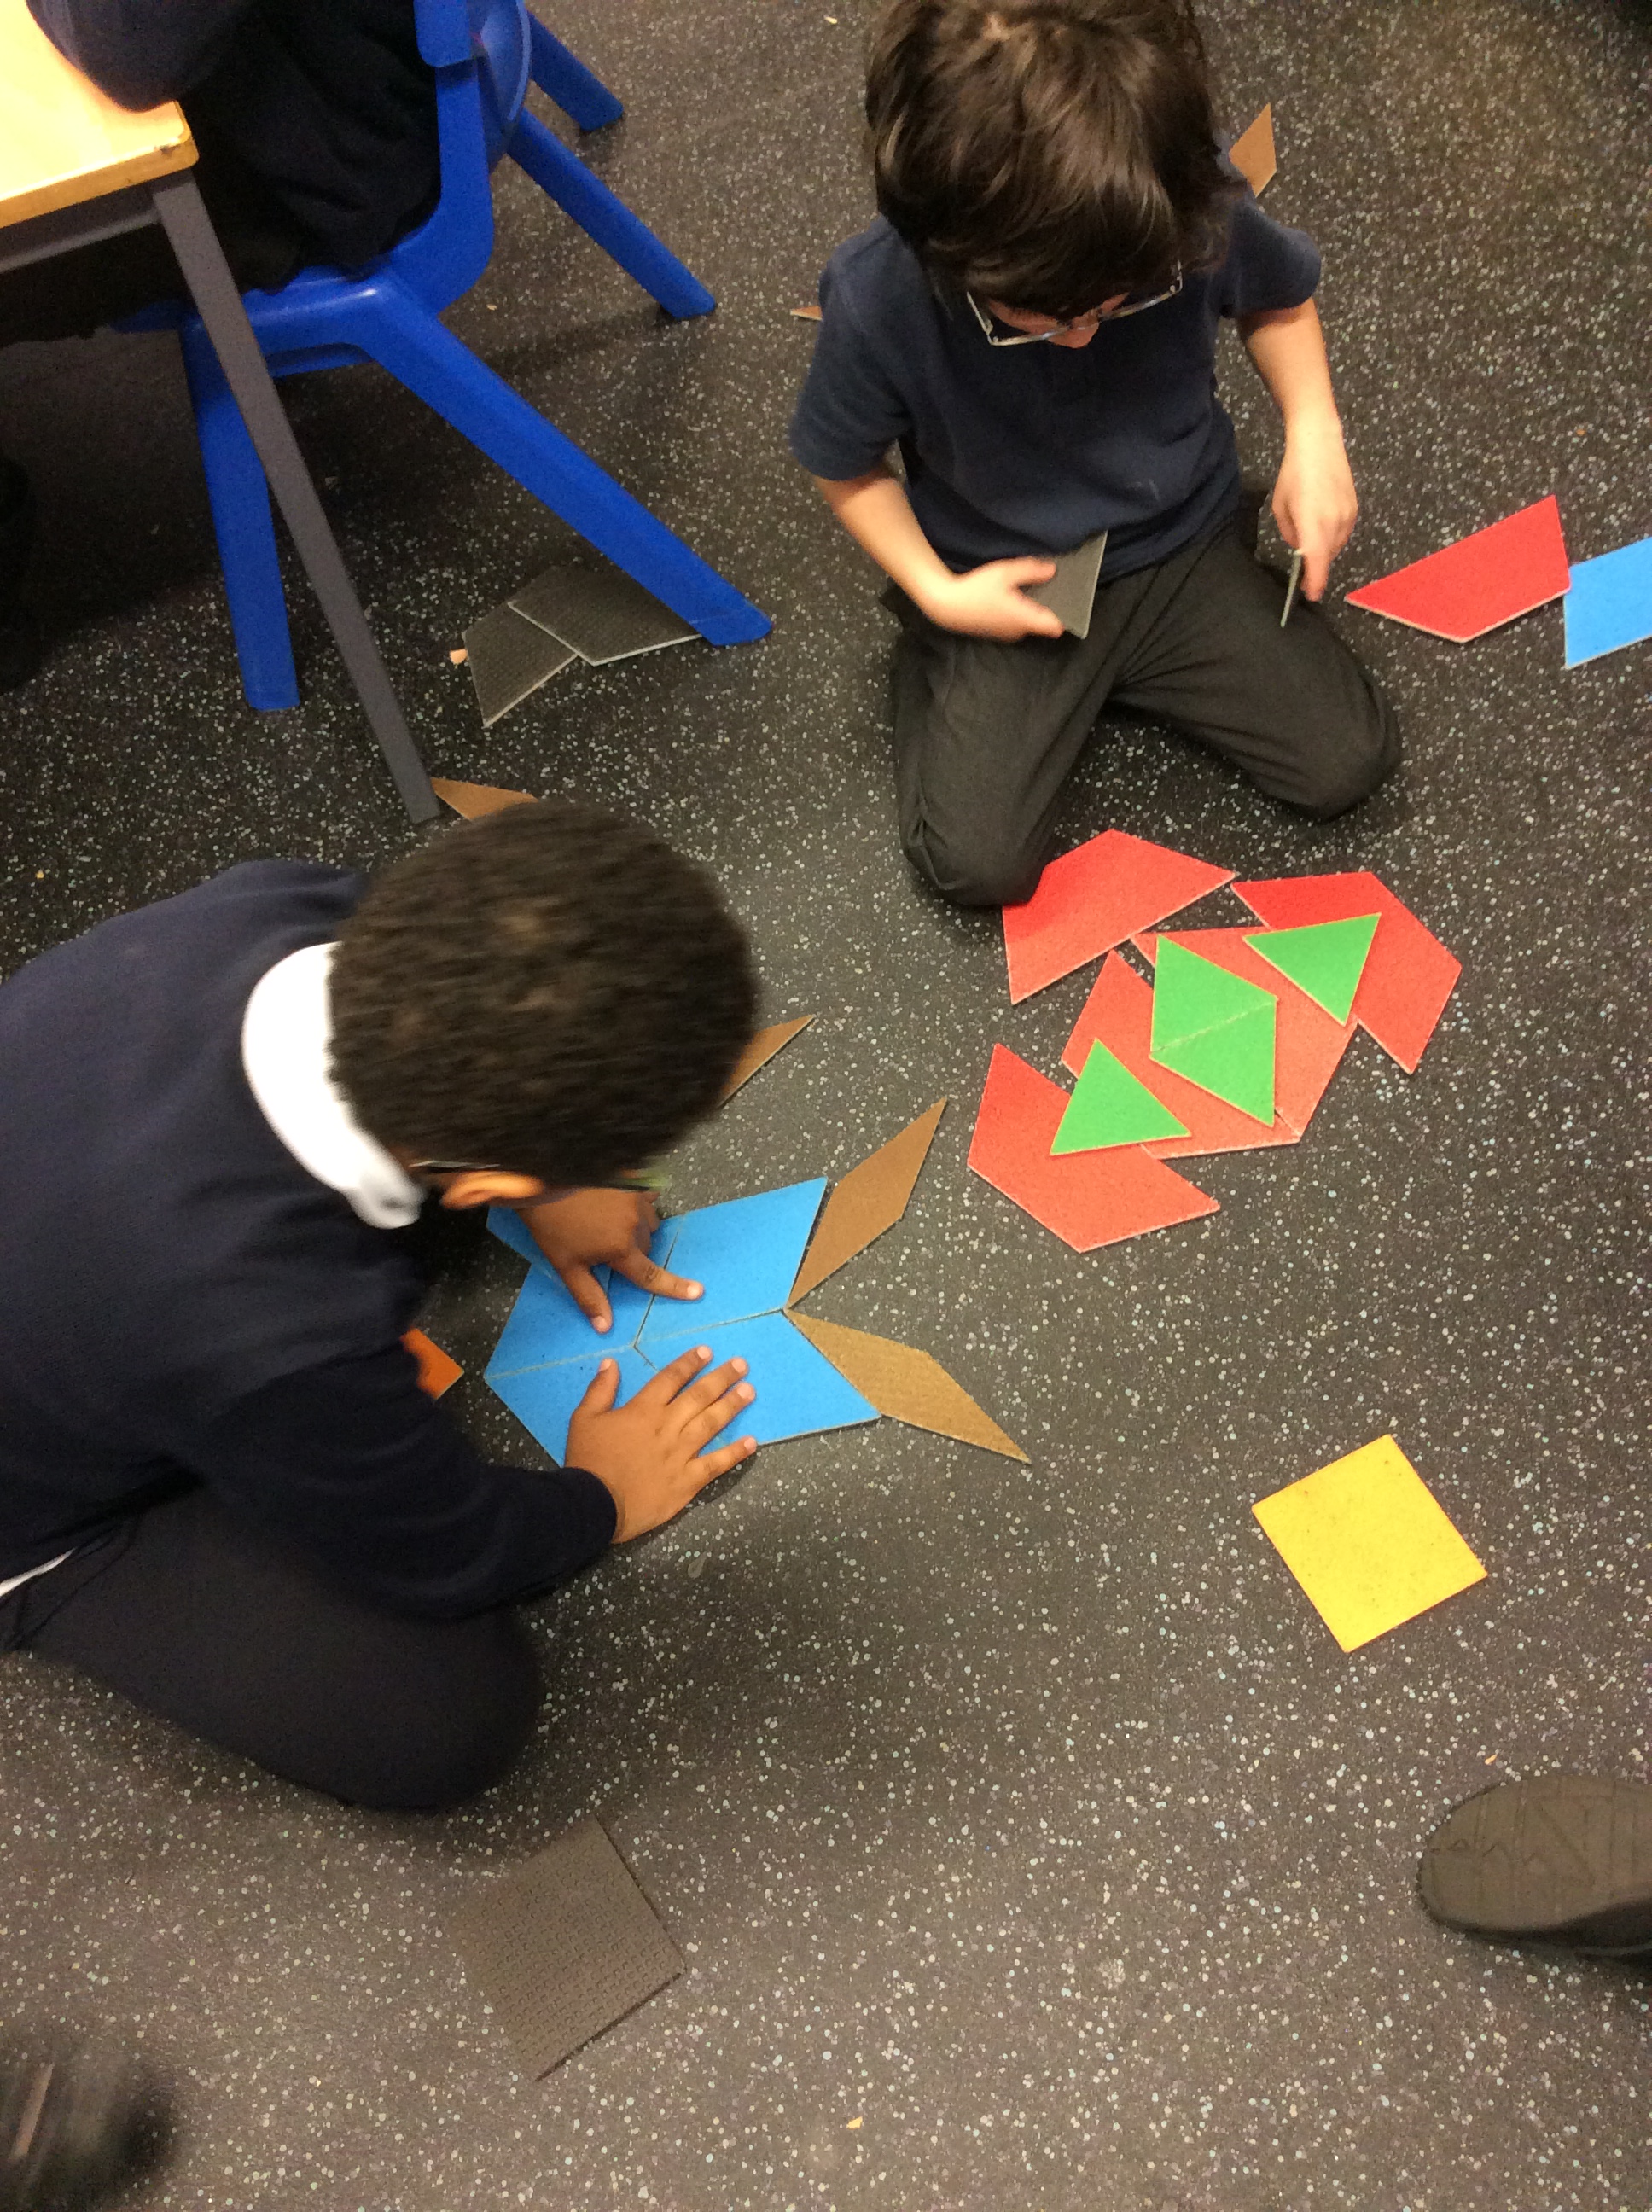 Tiling with 2D shapes